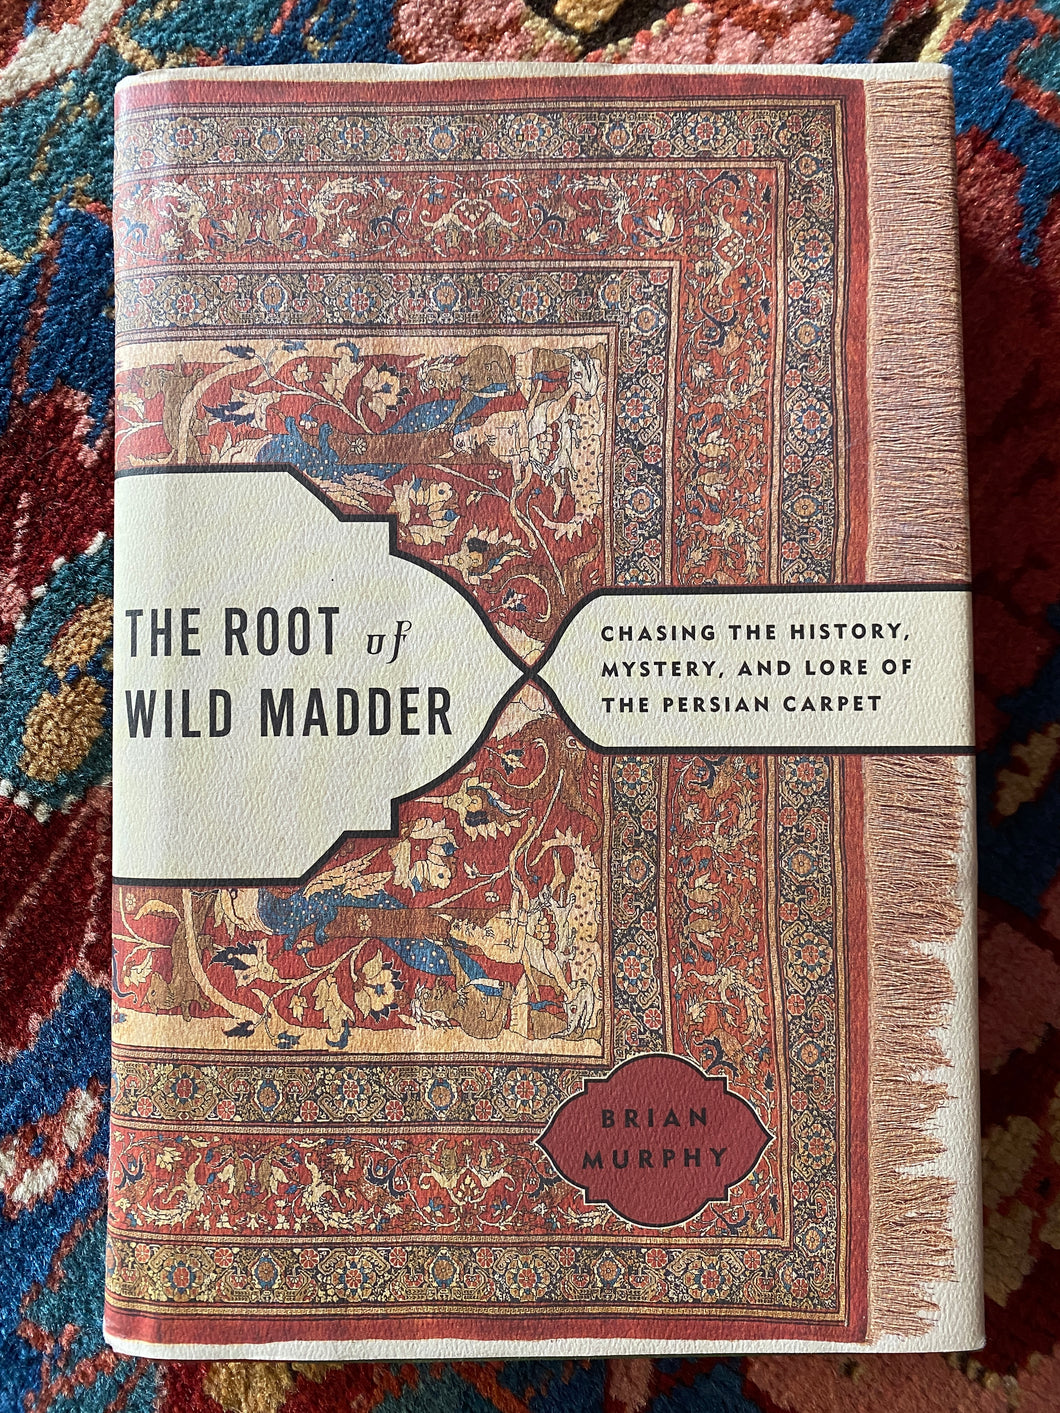 The Root of Wild Madder ~ Chasing the History, Mystery, and Lore of the Persian Carpet by Brian Murphy